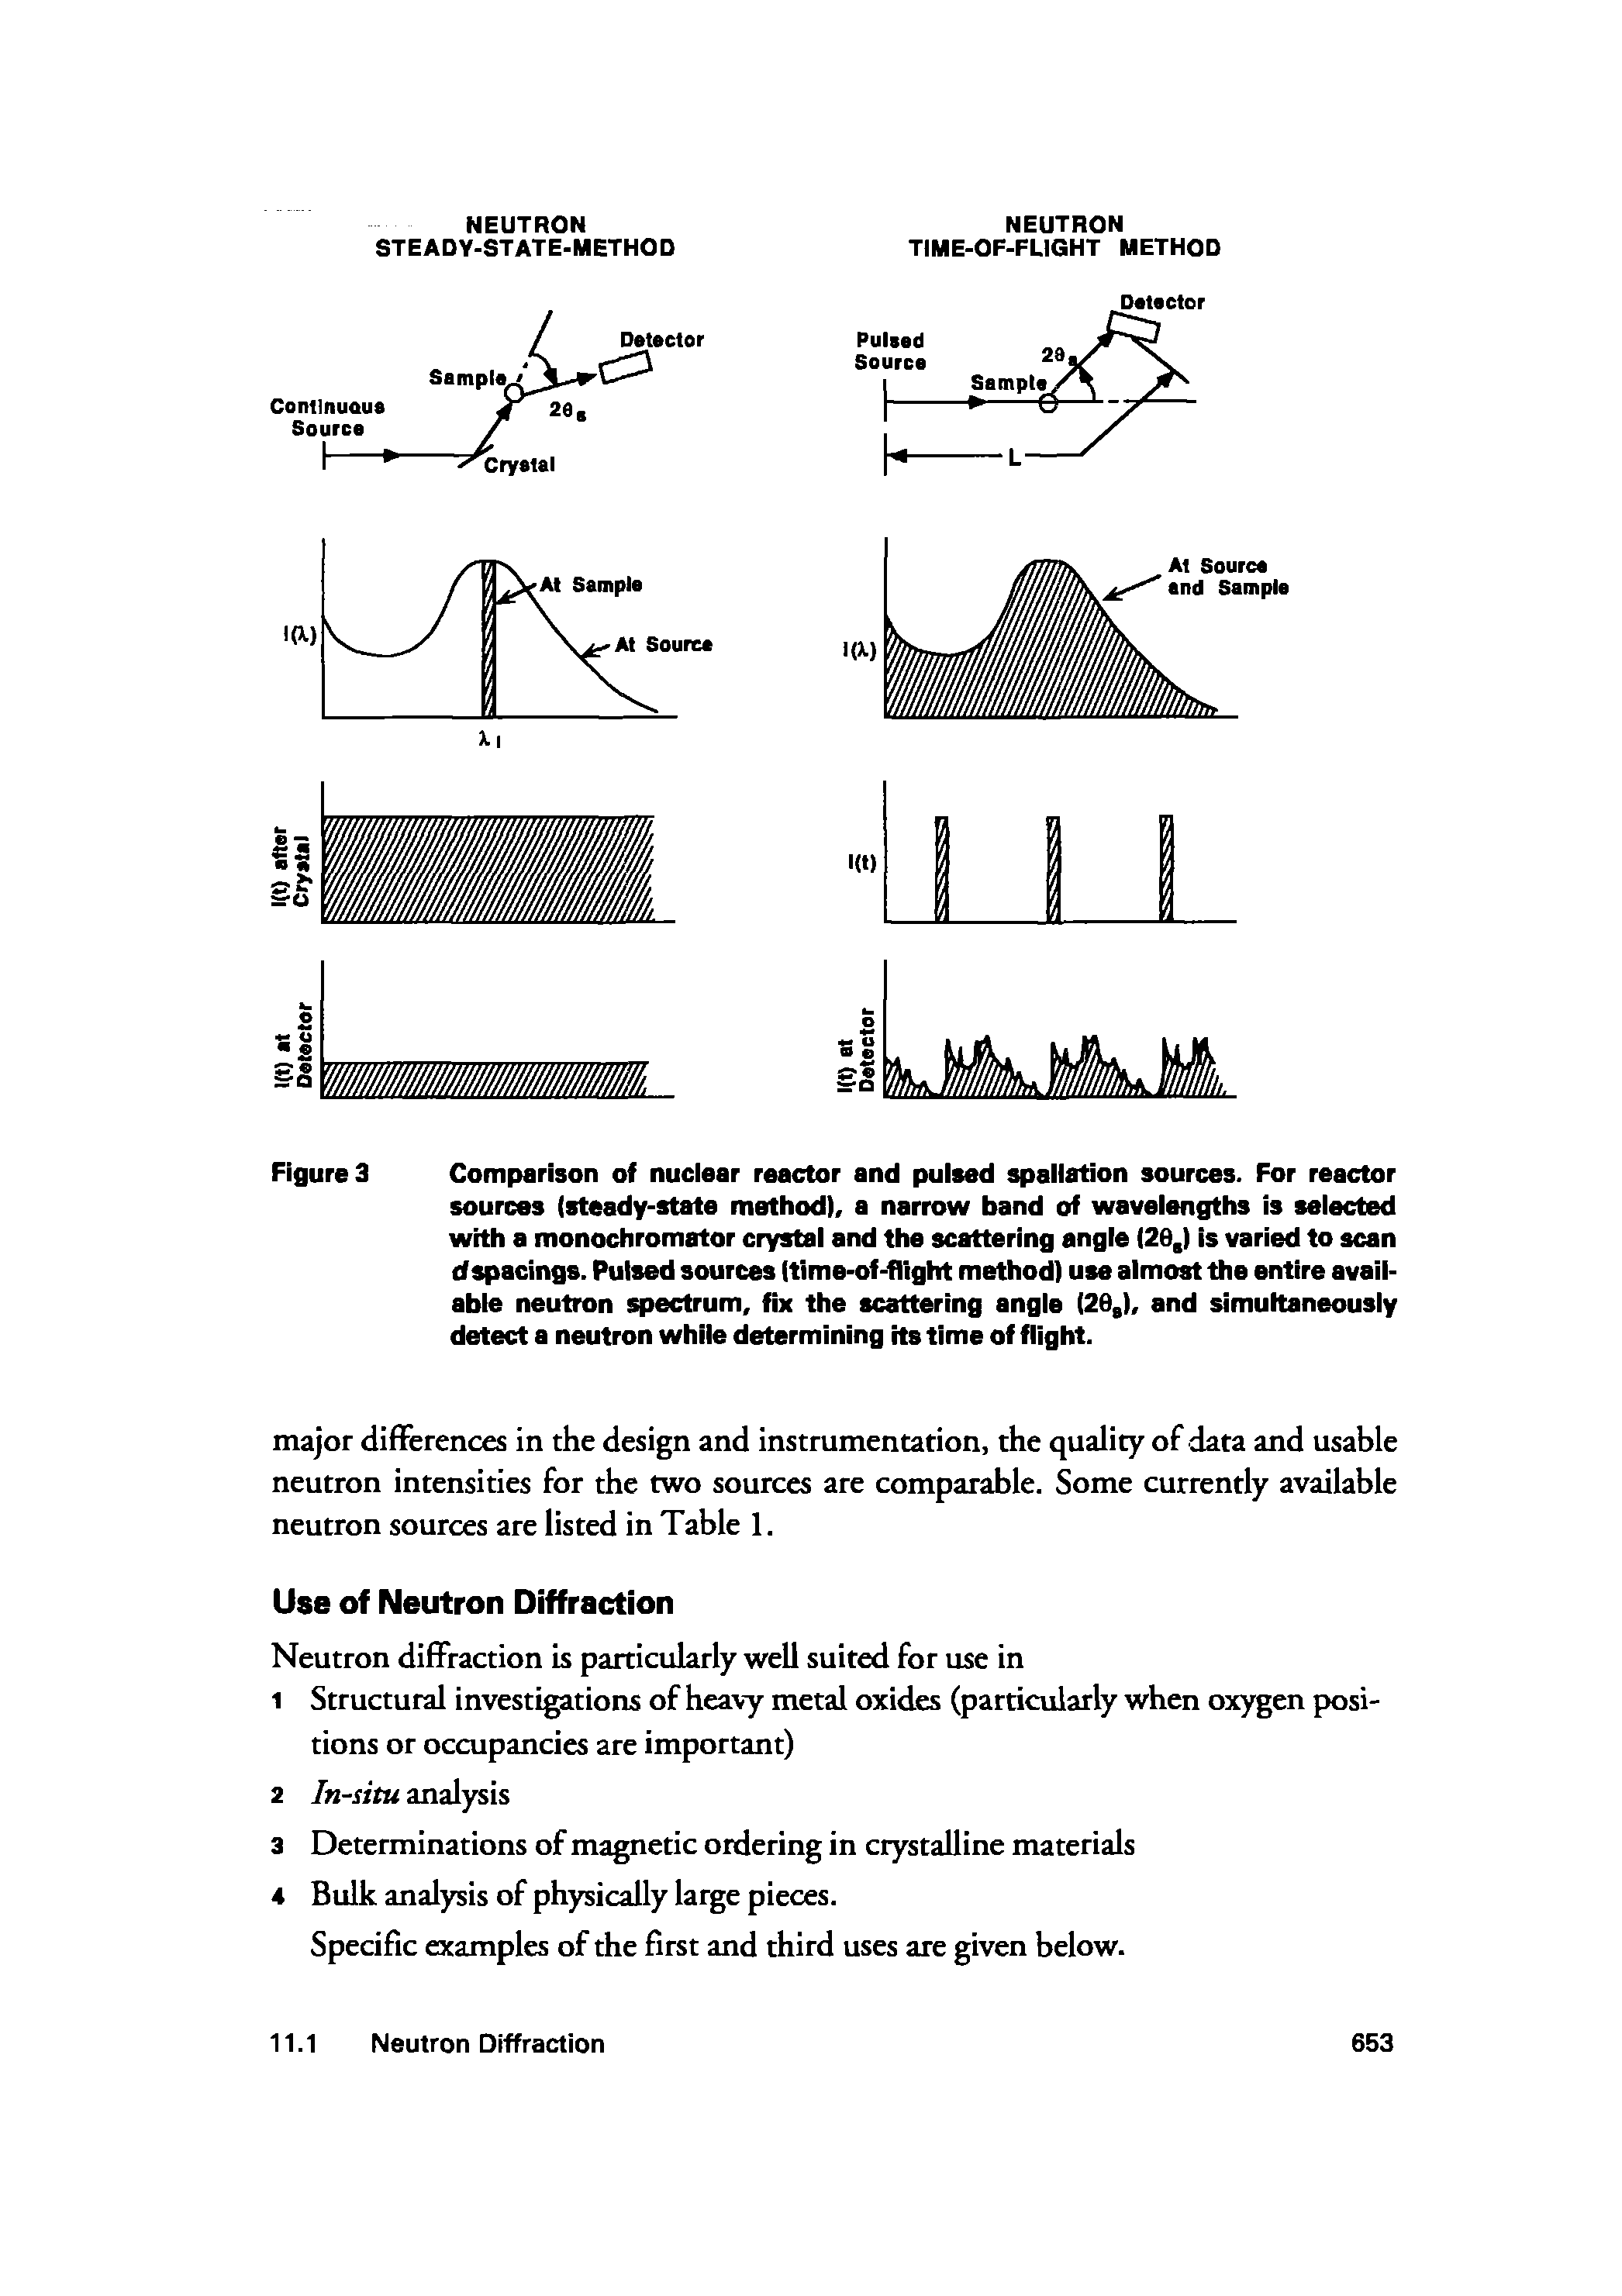 Figures Comparison of nuciear reactor and pulsed spaliation sources. For reactor sources (steady-state method), a narrow band of wavelengths is seiected with a monochromator crystal and the scattering angle (26,) Is varied to scan dspacings. Pulsed sources (time-of-flight method) use almost the entire avail-abie neutron spectrum, fix the scattering angie (26,), and simultaneousiy detect a neutron while determining its time of flight.